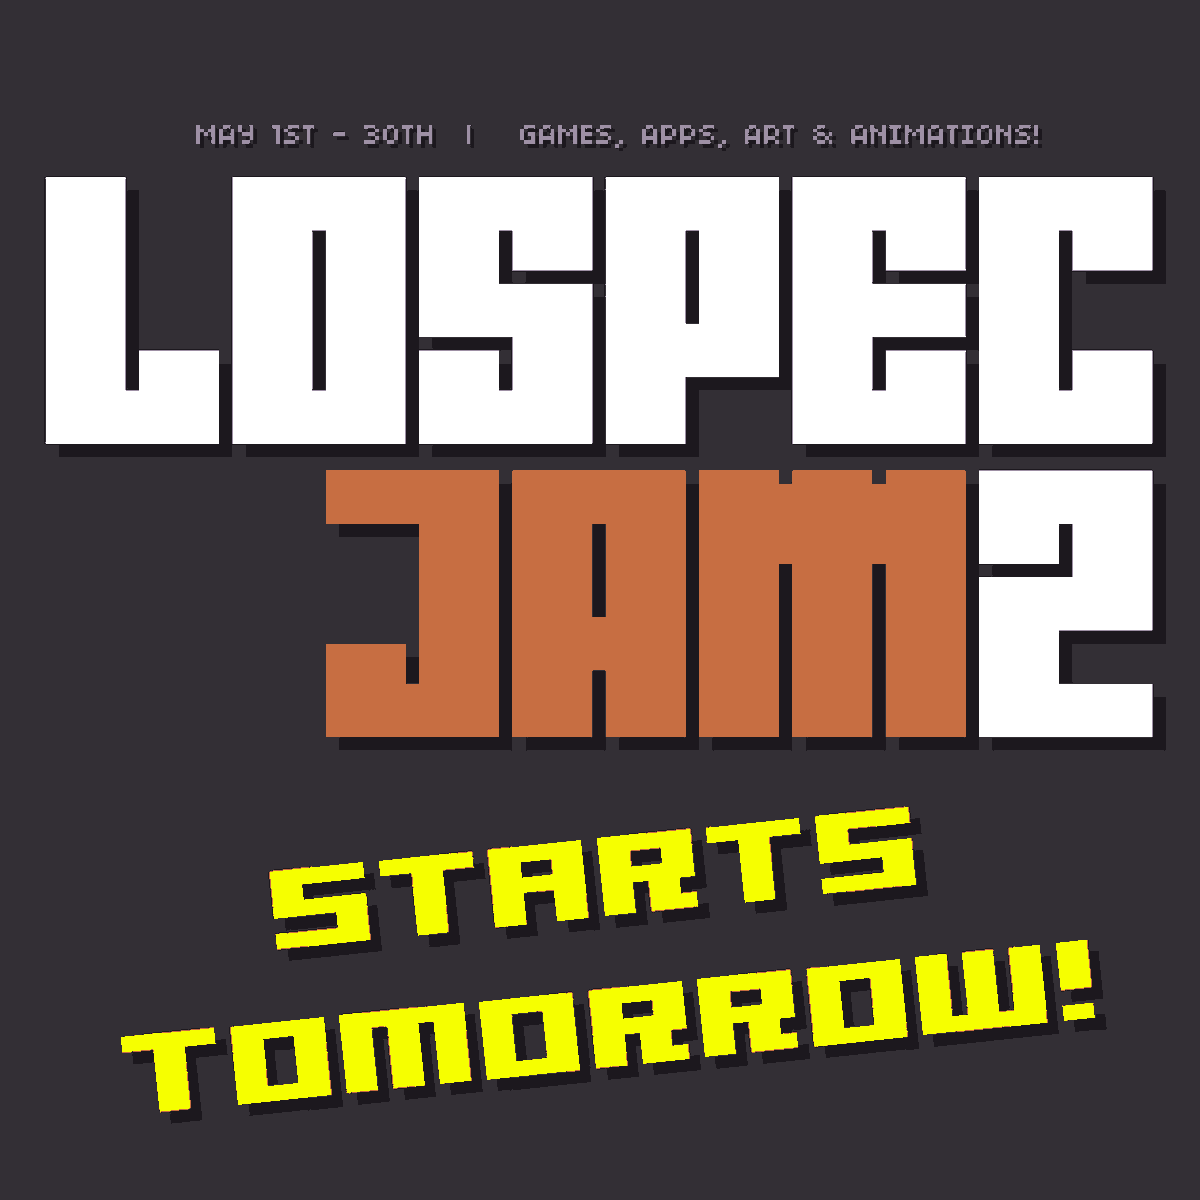 #LospecJam2 Starts tomorrow! Over 150 people have signed up to make Games, Apps, Art and Animations for our imaginary console! #pixelart #gamedev